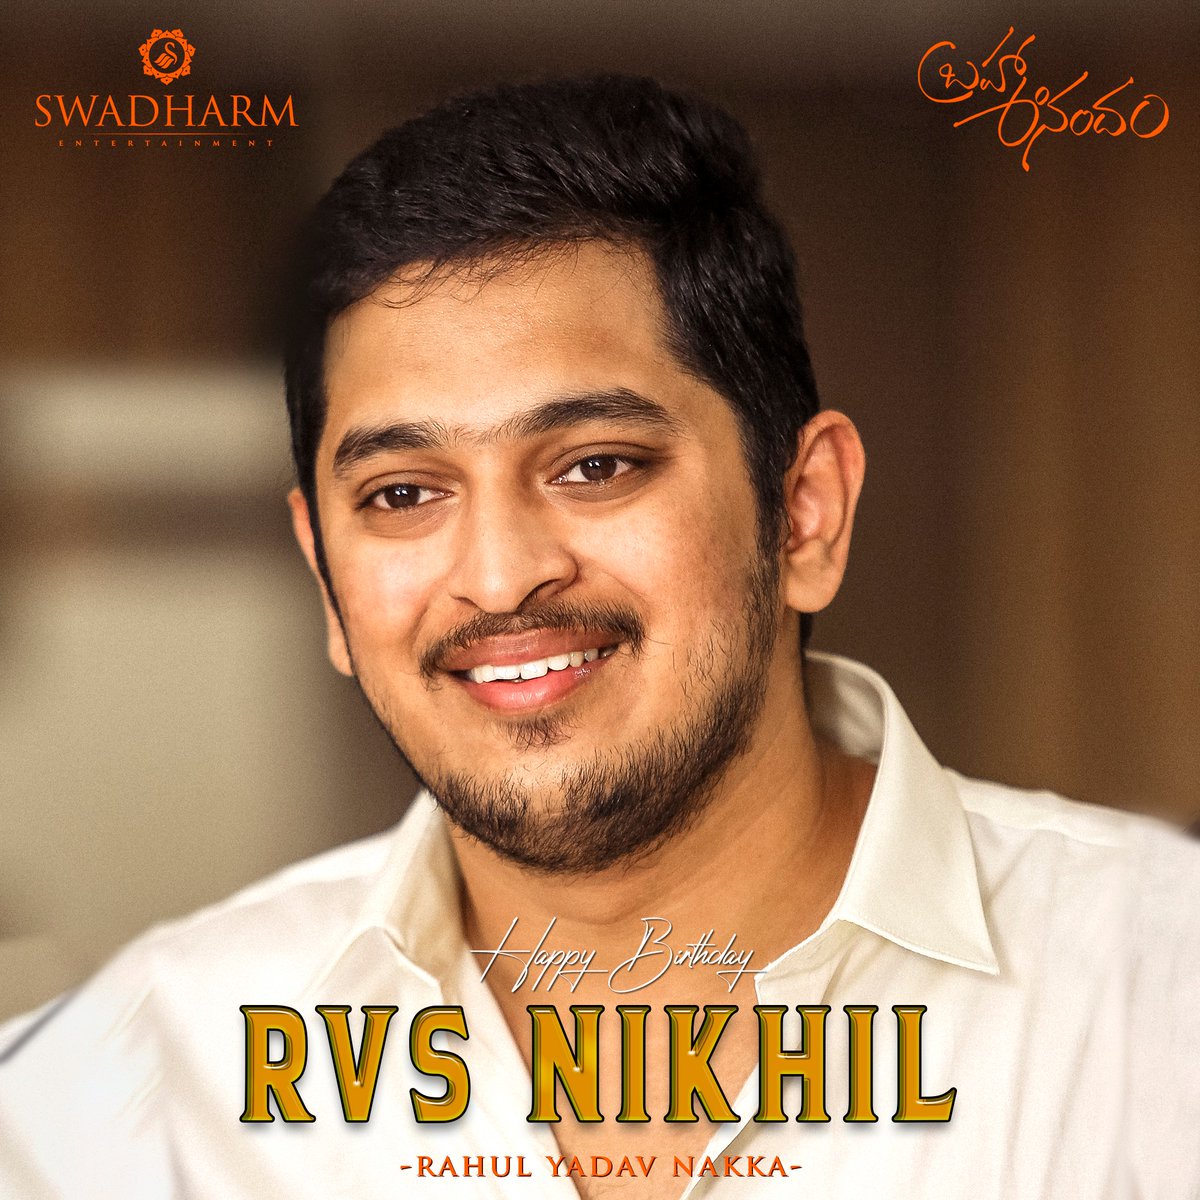 Wish our #BrahmaAnandam Director Rvs Nikhil a Very Happy Birthday. Here's to another year of cinematic brilliance! @rvs_nikhil25 #ProductionNo4 #director @RahulYadavNakka